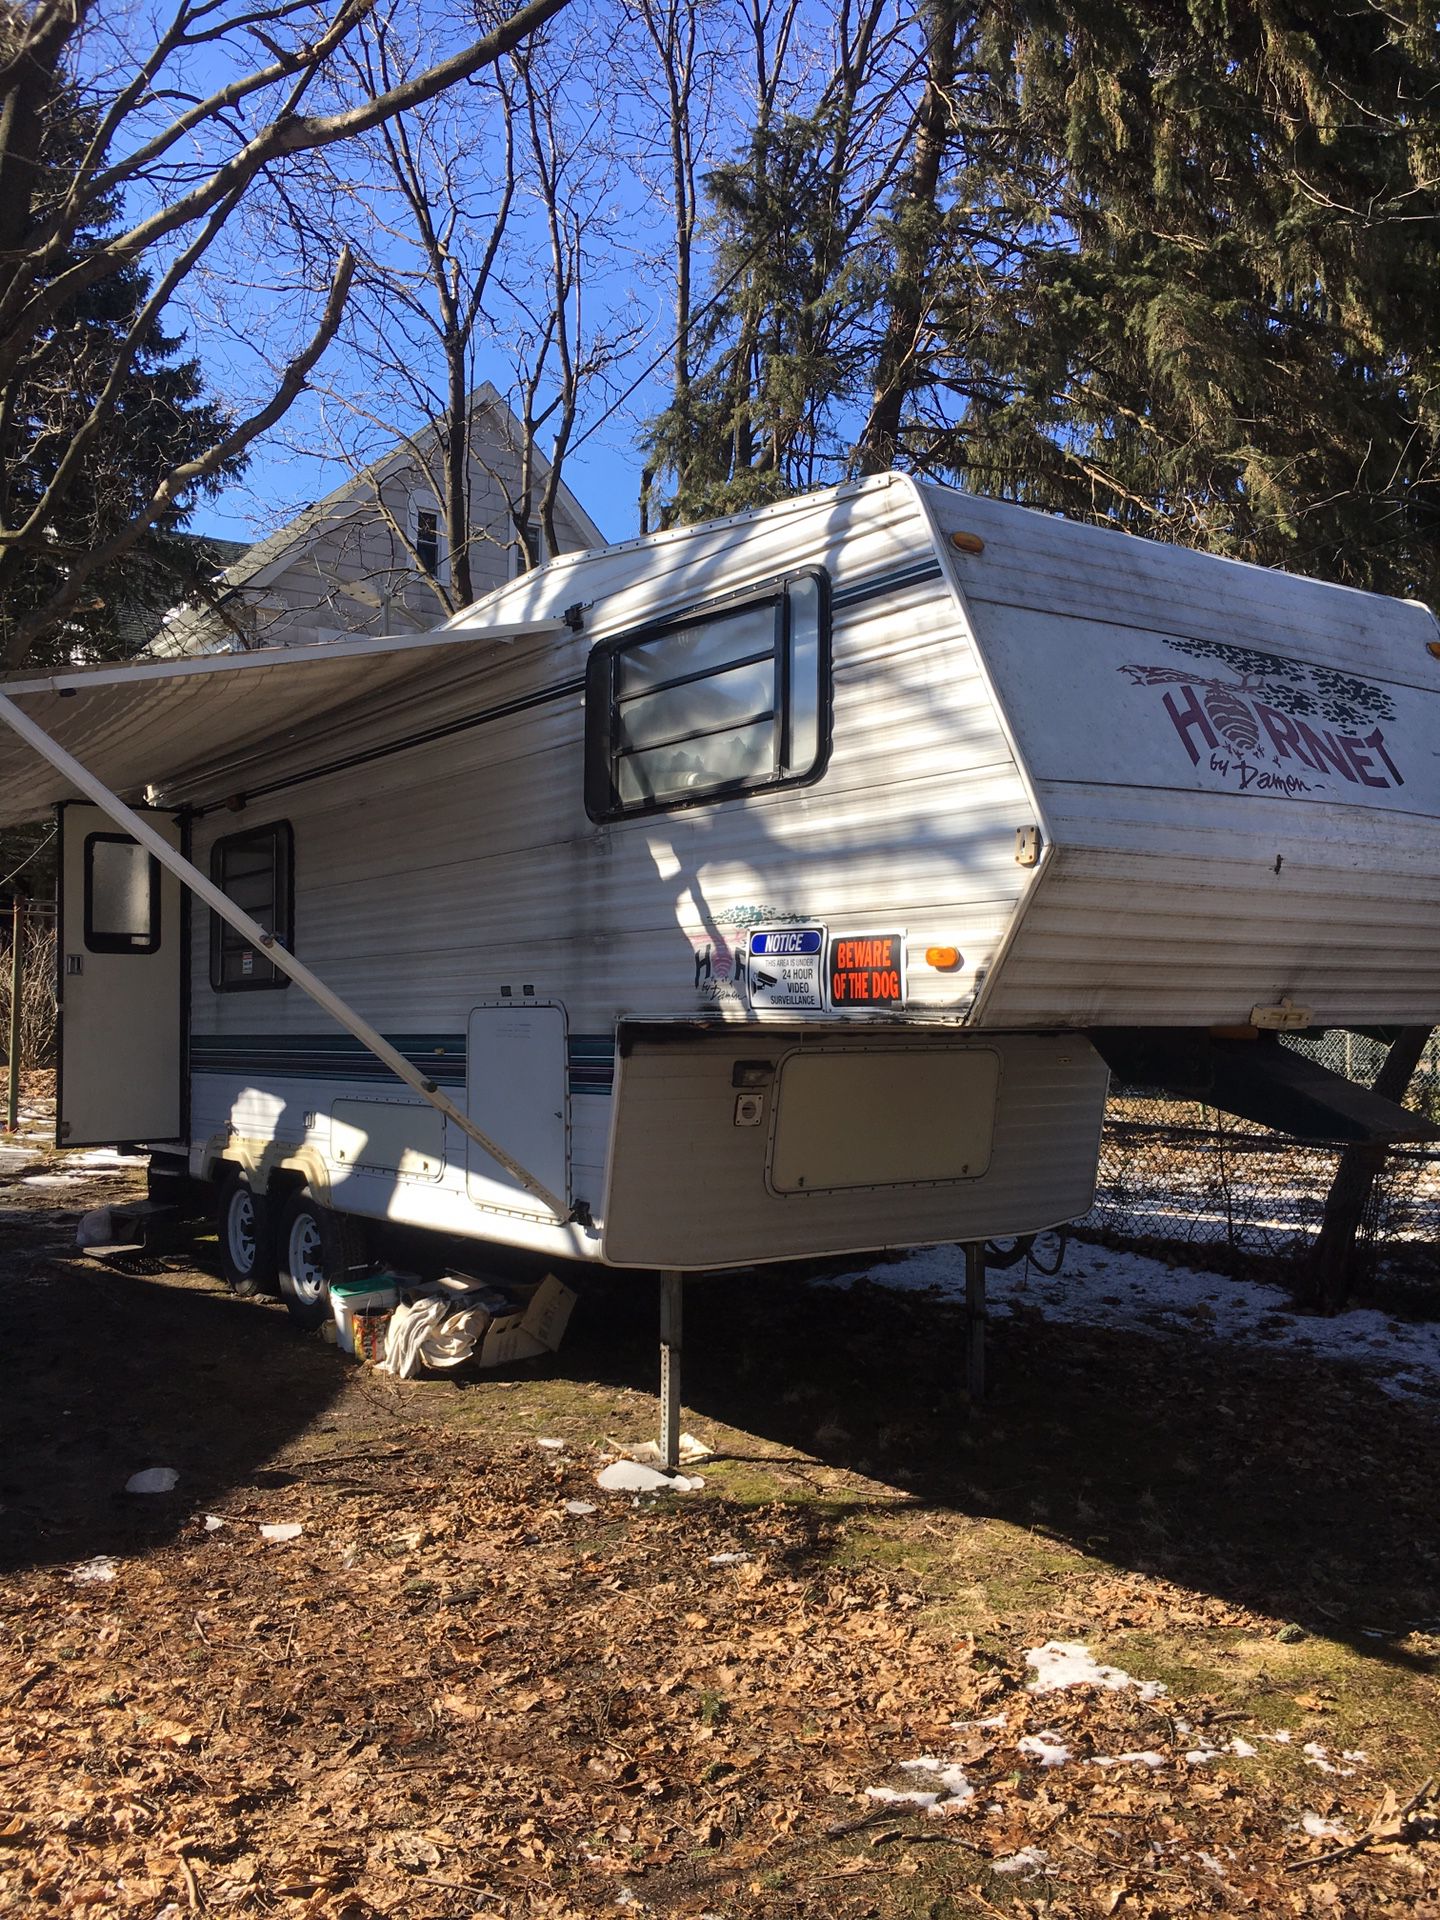 Trade for running car Hornet 5th wheel camper ready to go 25ft